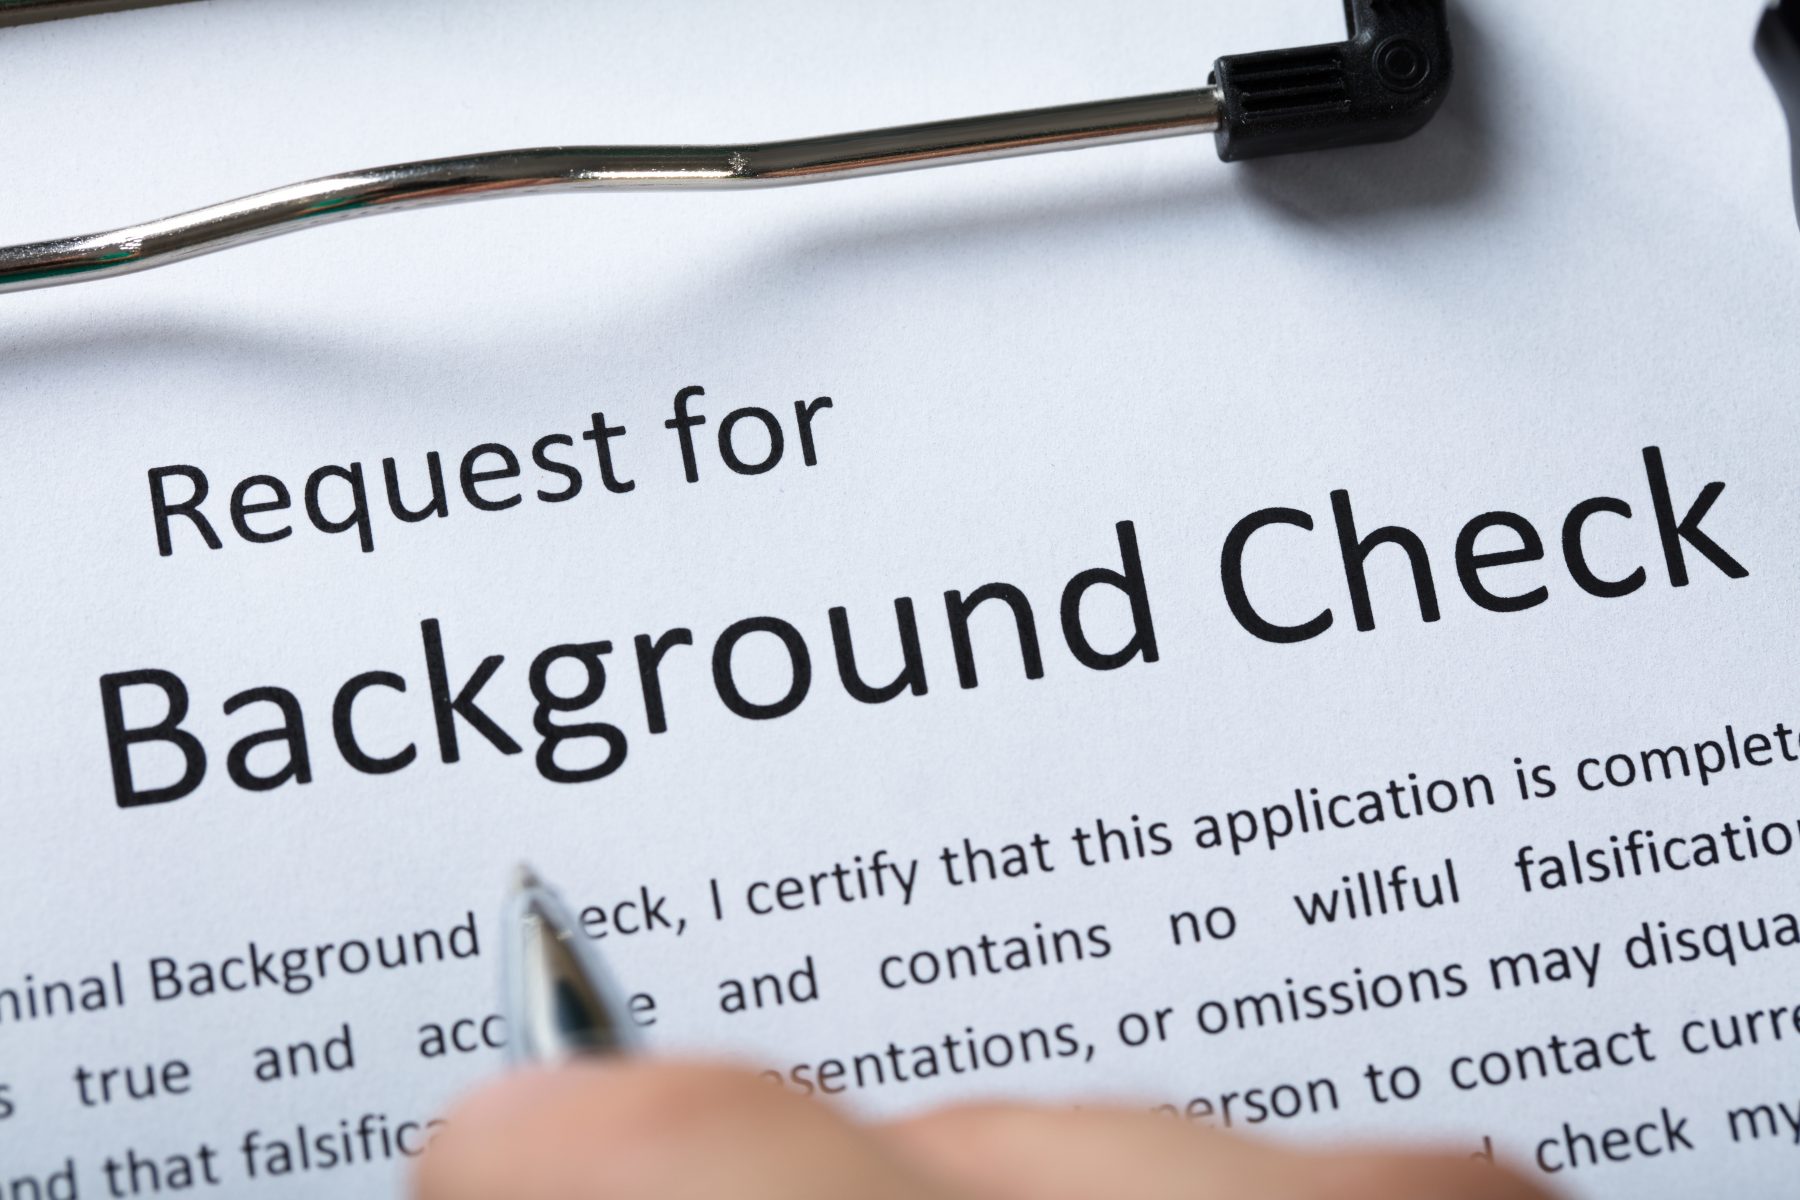 Can Your Employer Perform Background Checks on You?